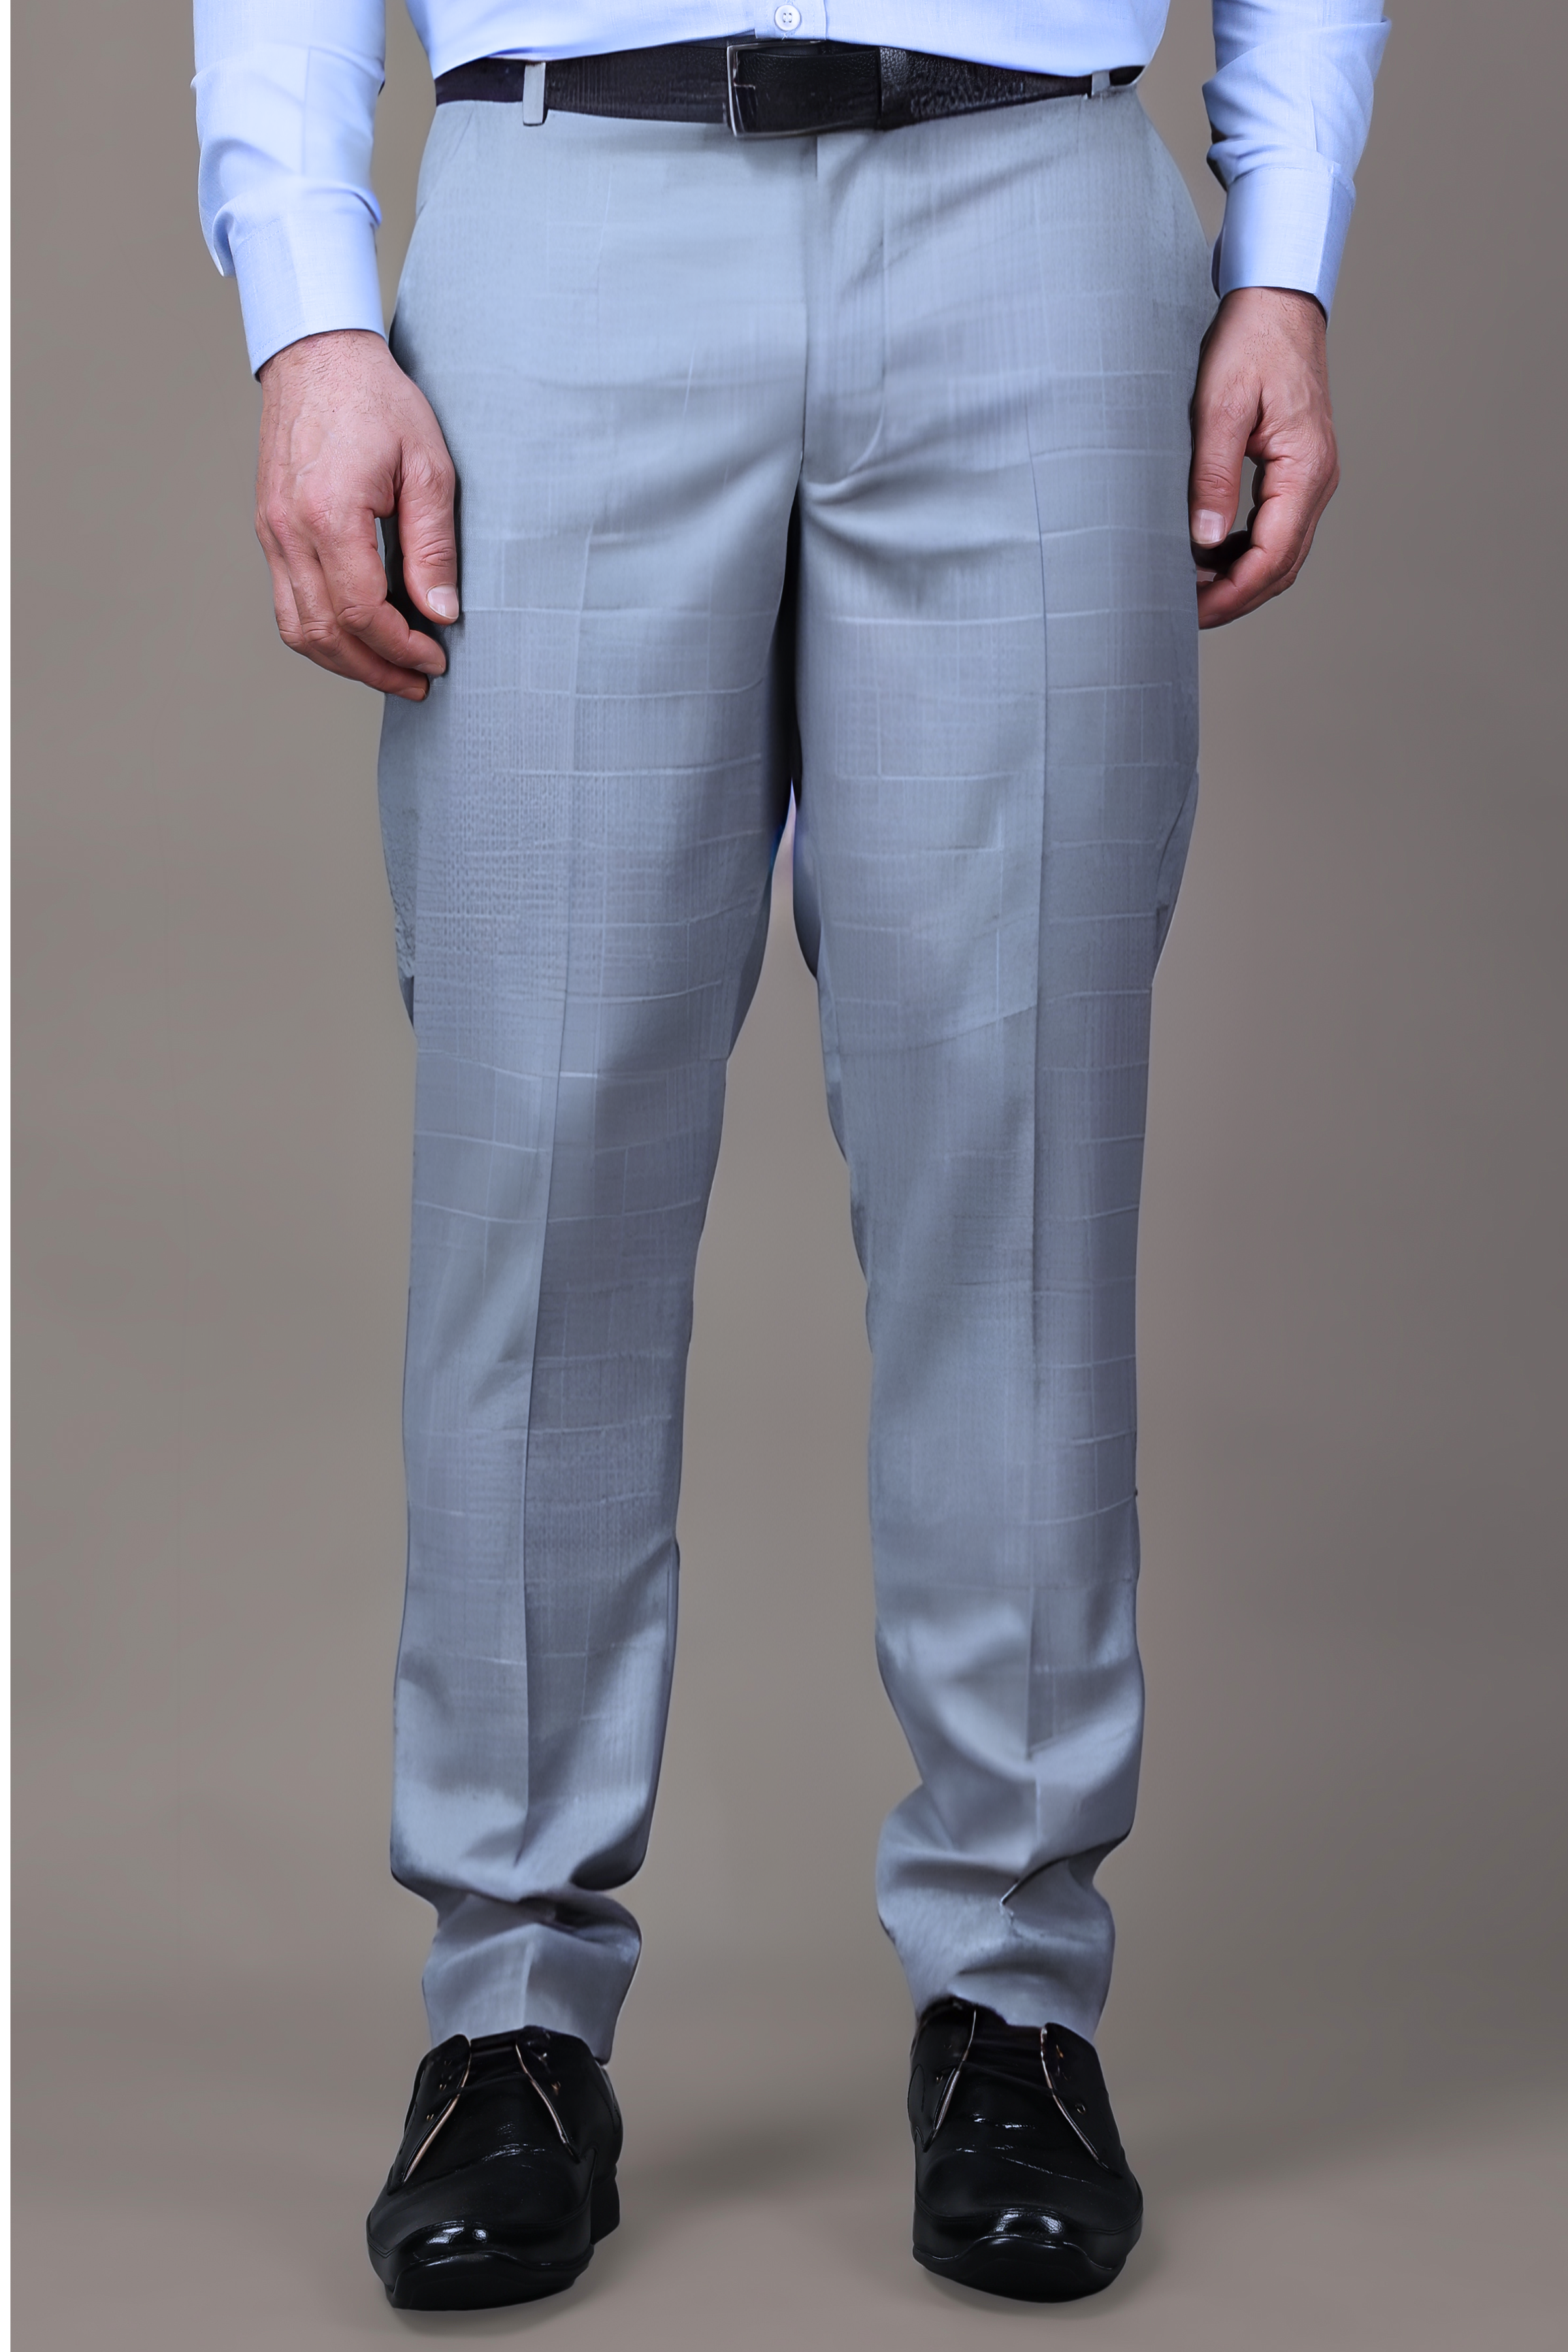 Office Men Check Trousers Formal Pants Business Suits Straight Leg Slim  Summer | eBay